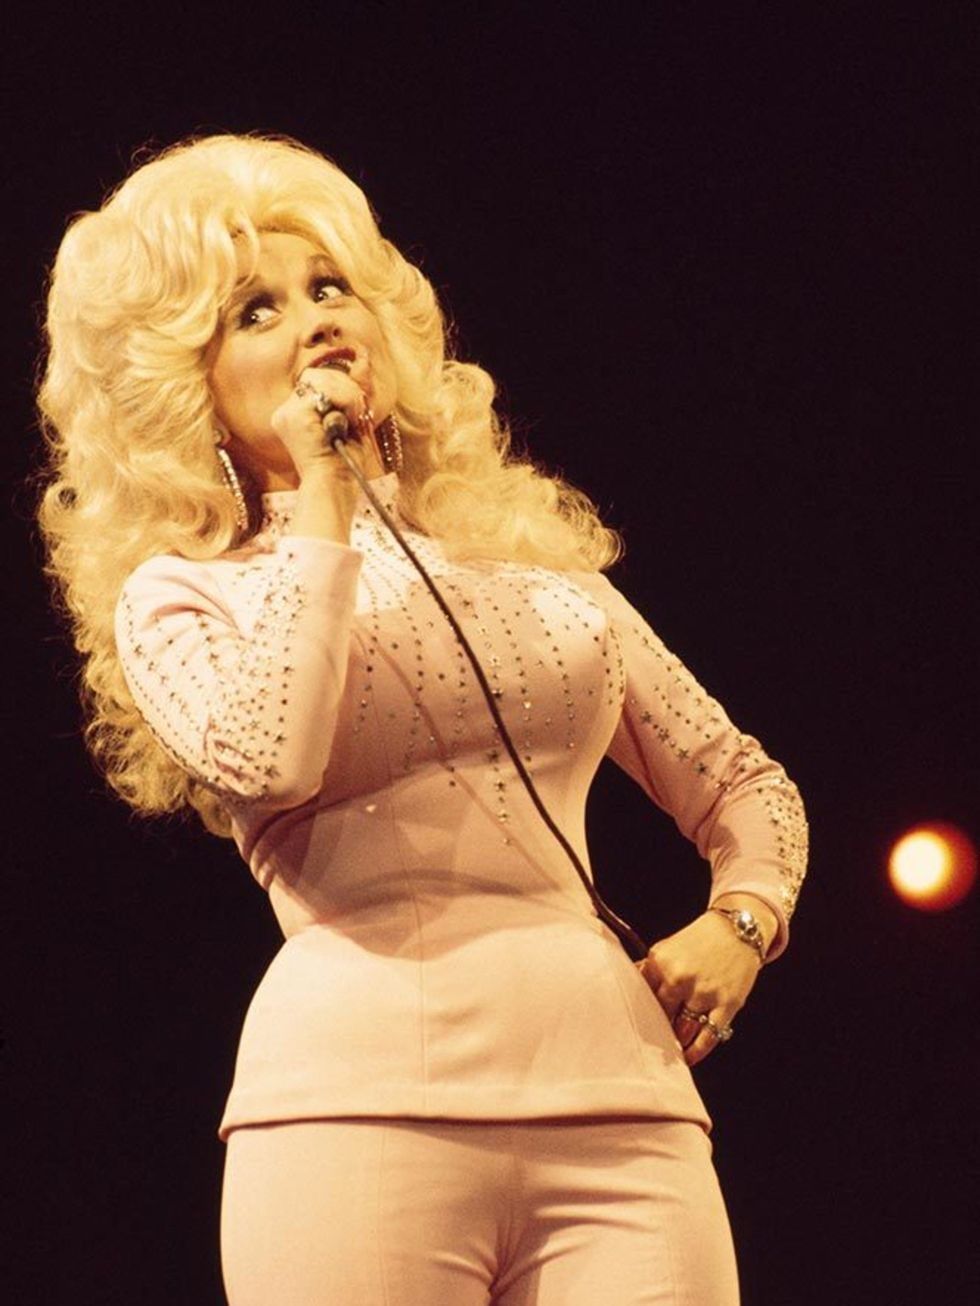 <p>Let's face it, Dolly wouldn't be Dolly without her two famous 40DD assets, so we can understand her need to lay down $60,000 to look after them.</p>